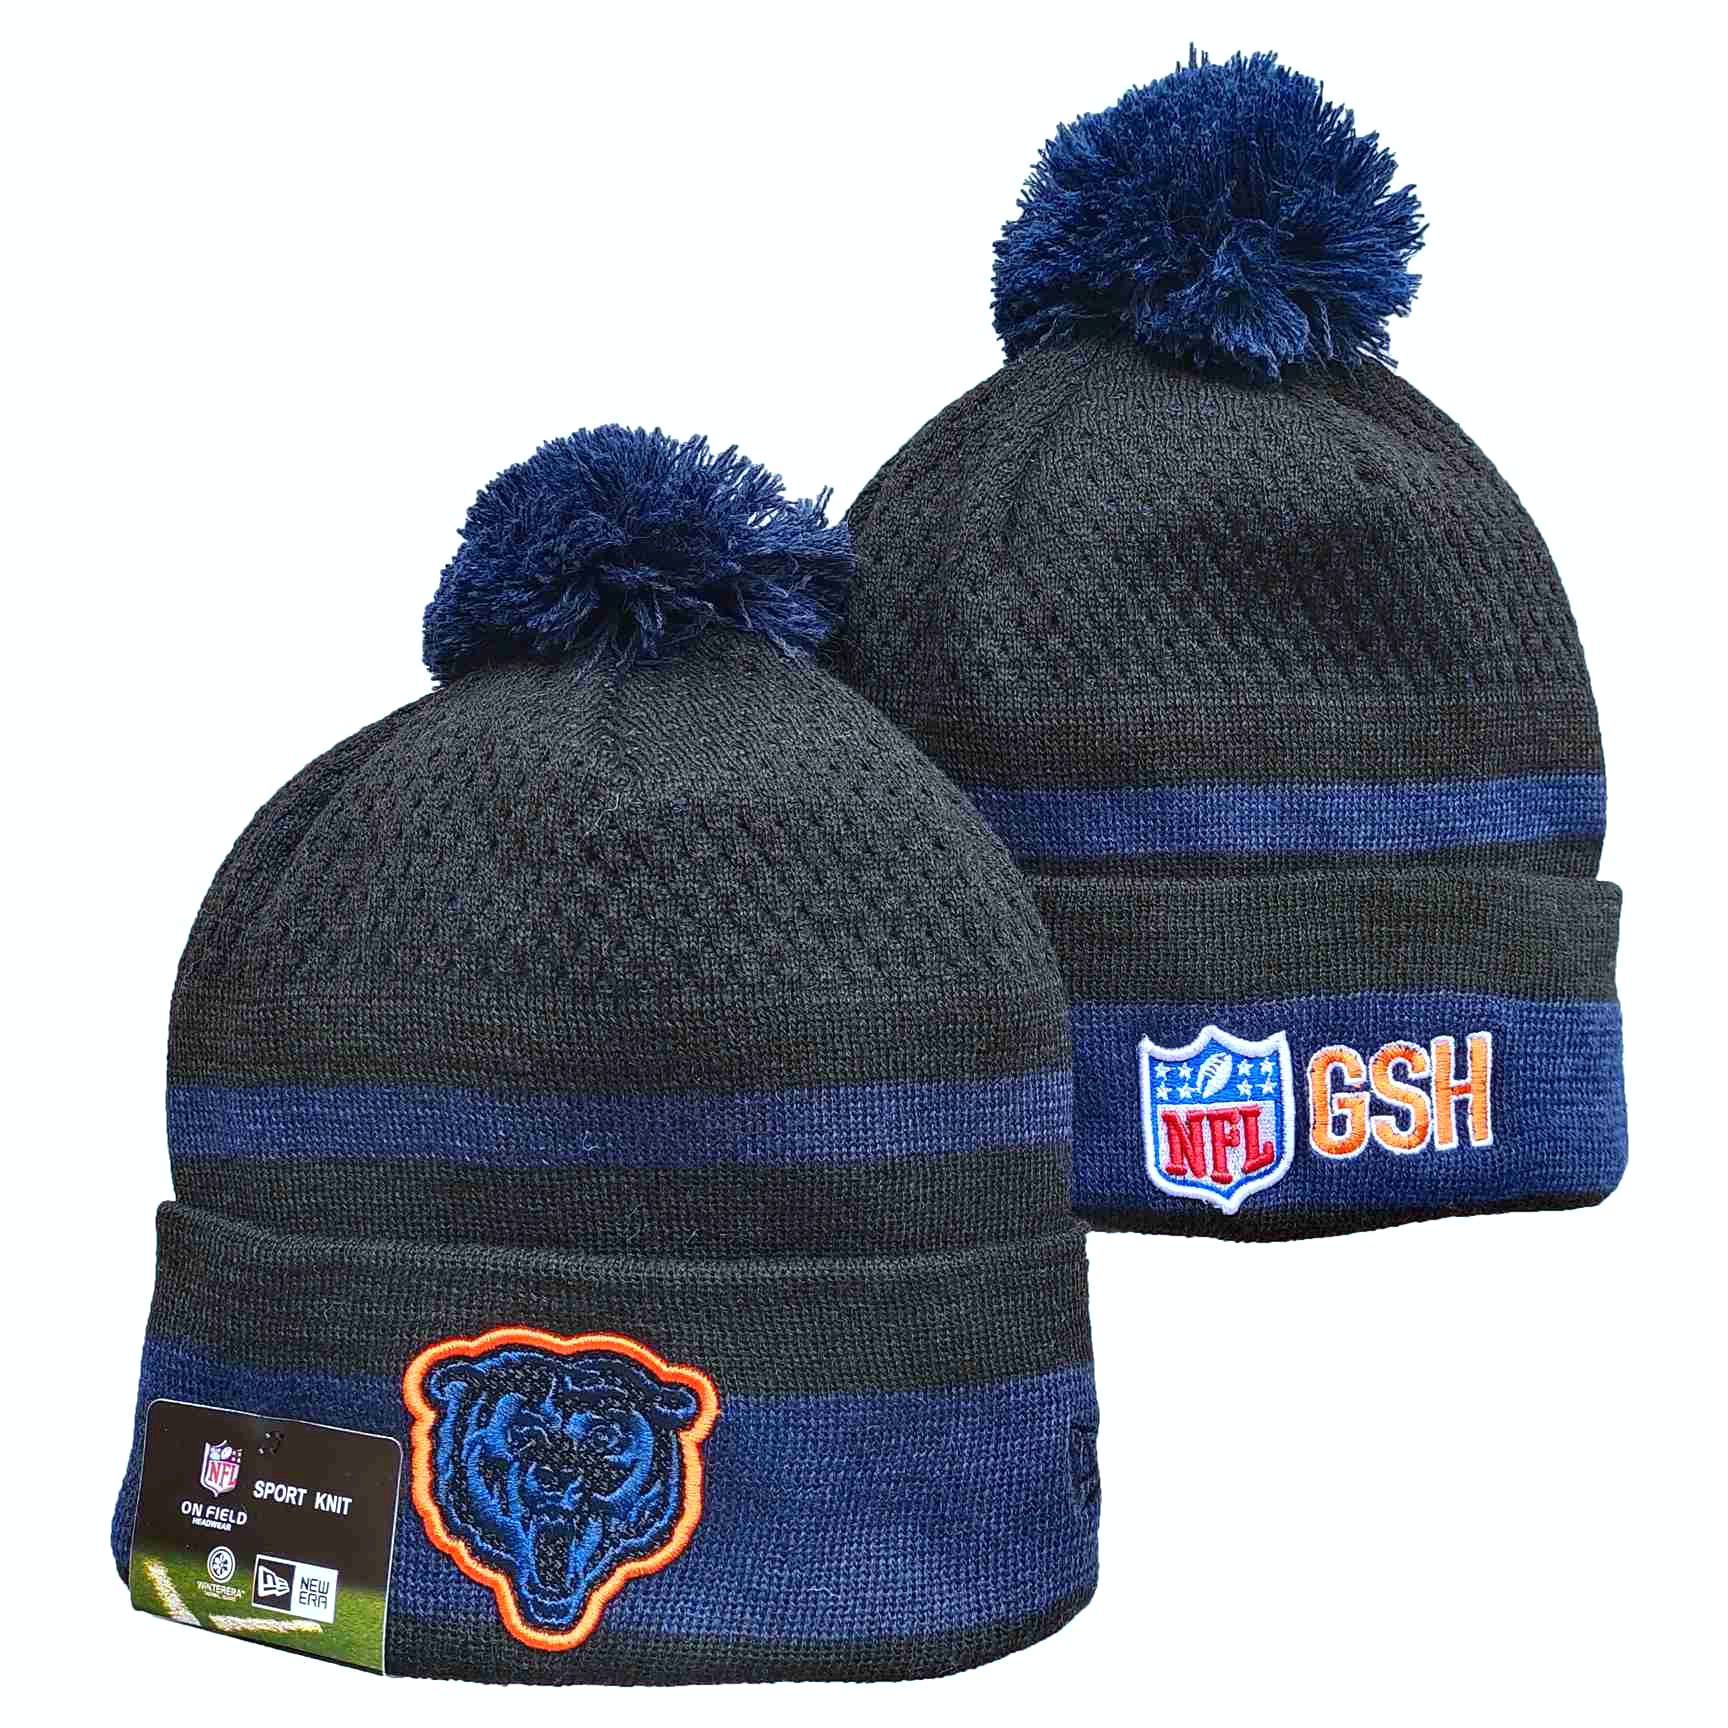 NFL Chicago Bears Beanies Knit Hats-YD888